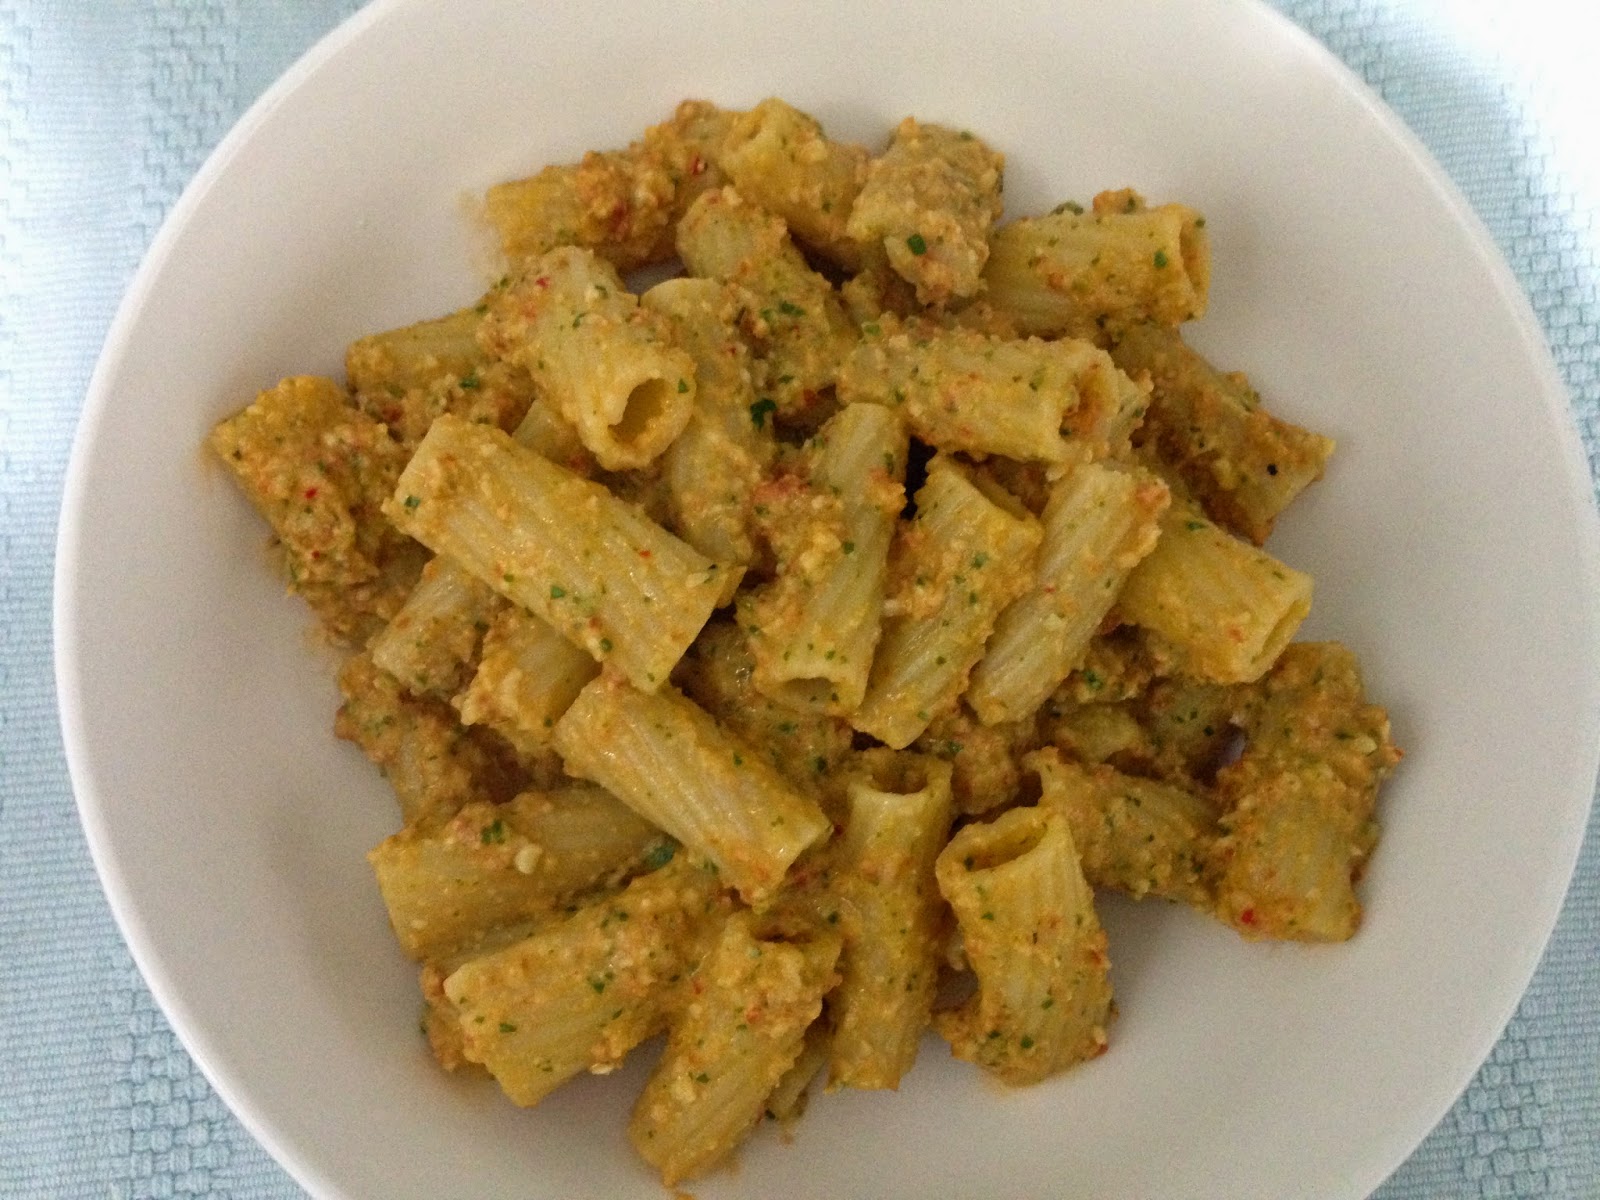 Jamie Oliver's Trapani-Style Rigatoni from 30 minute Meals.